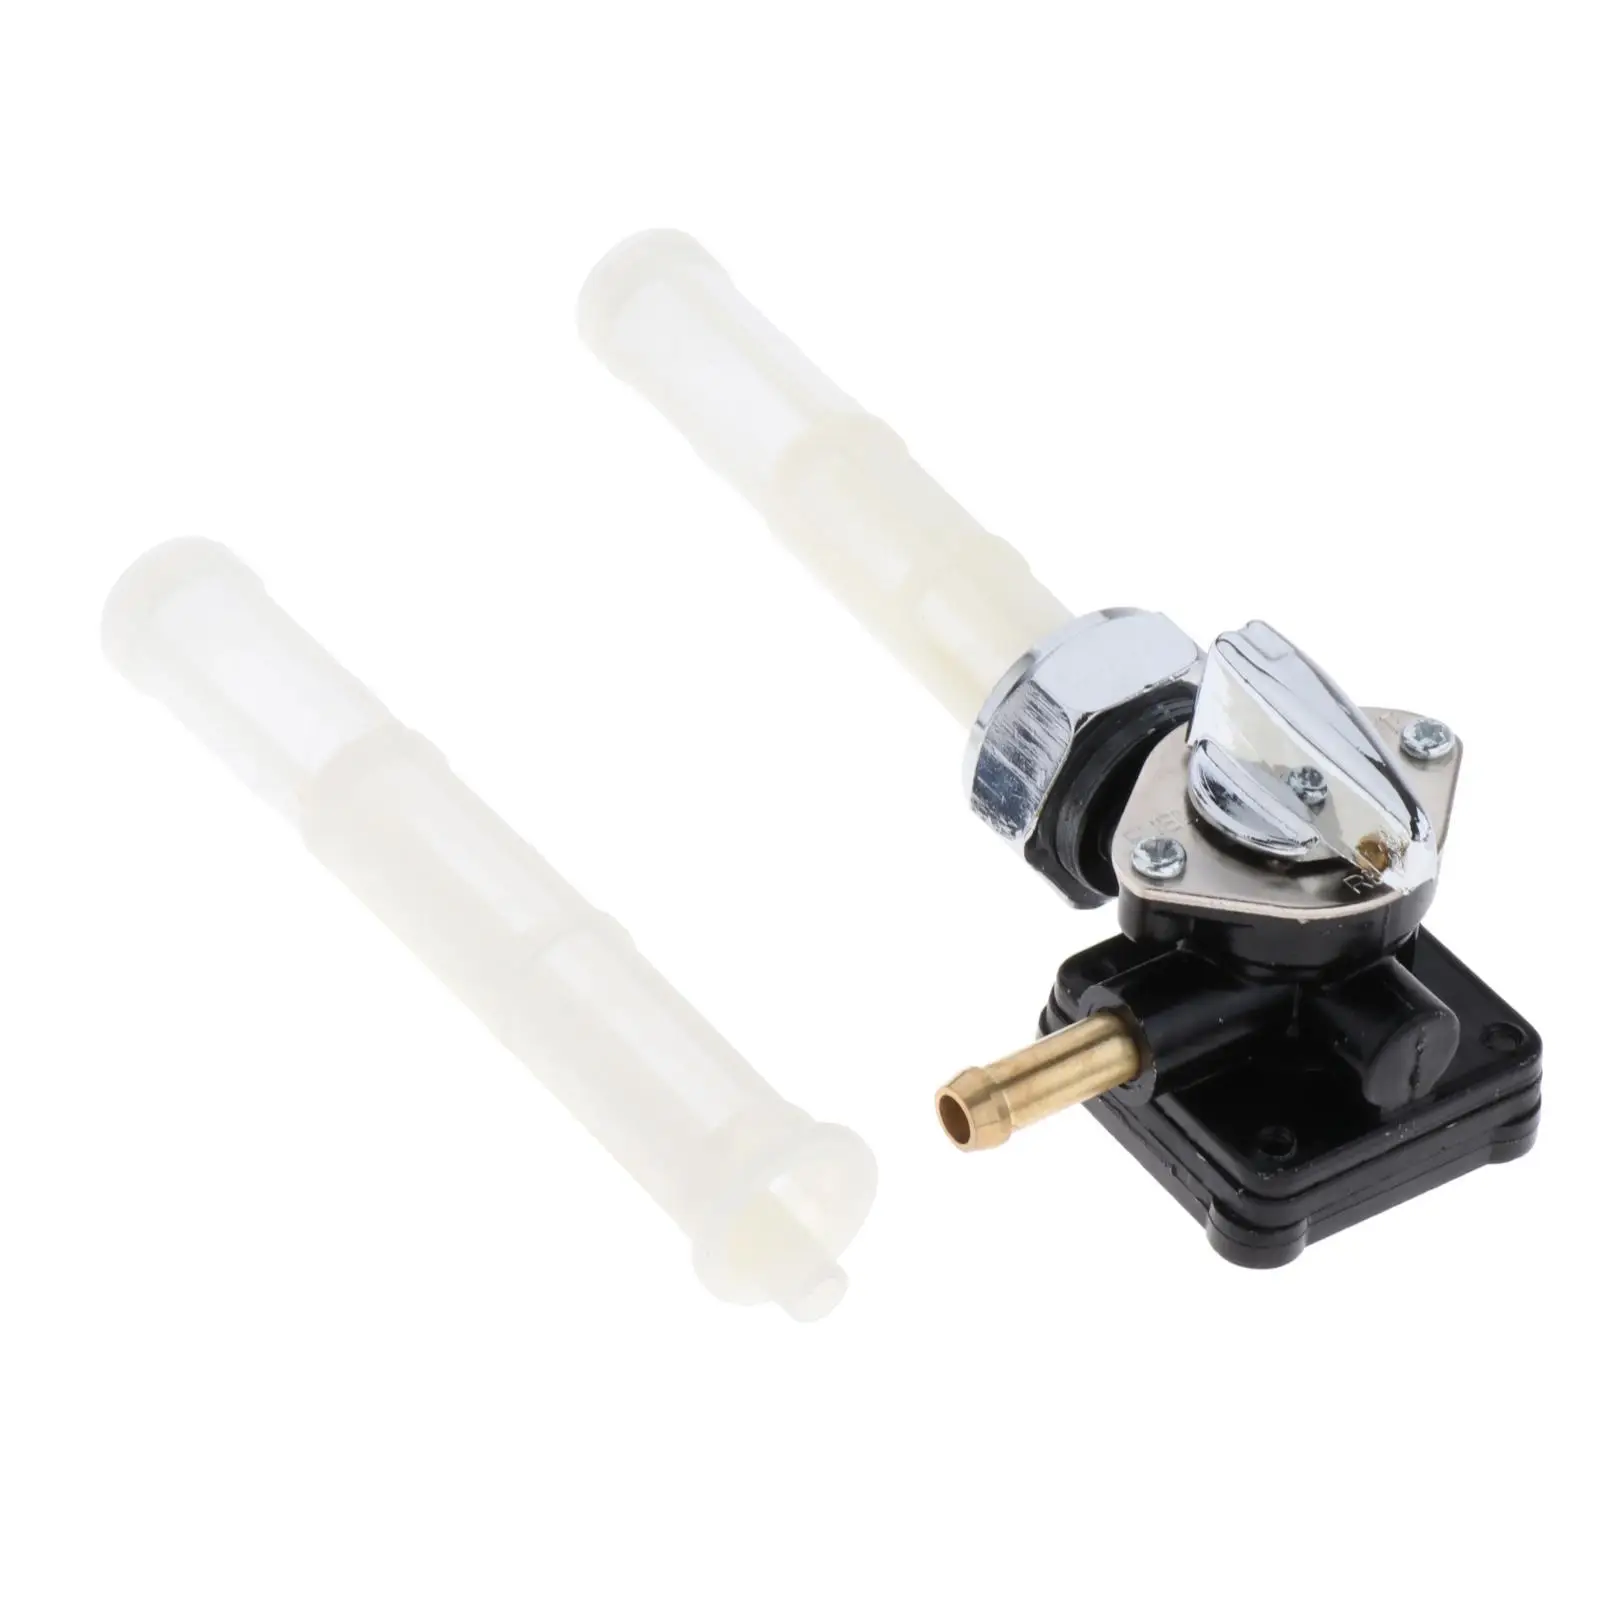 Fuel Valve Petcock 61338-94D with Filter Mesh, Shut Off Switch for